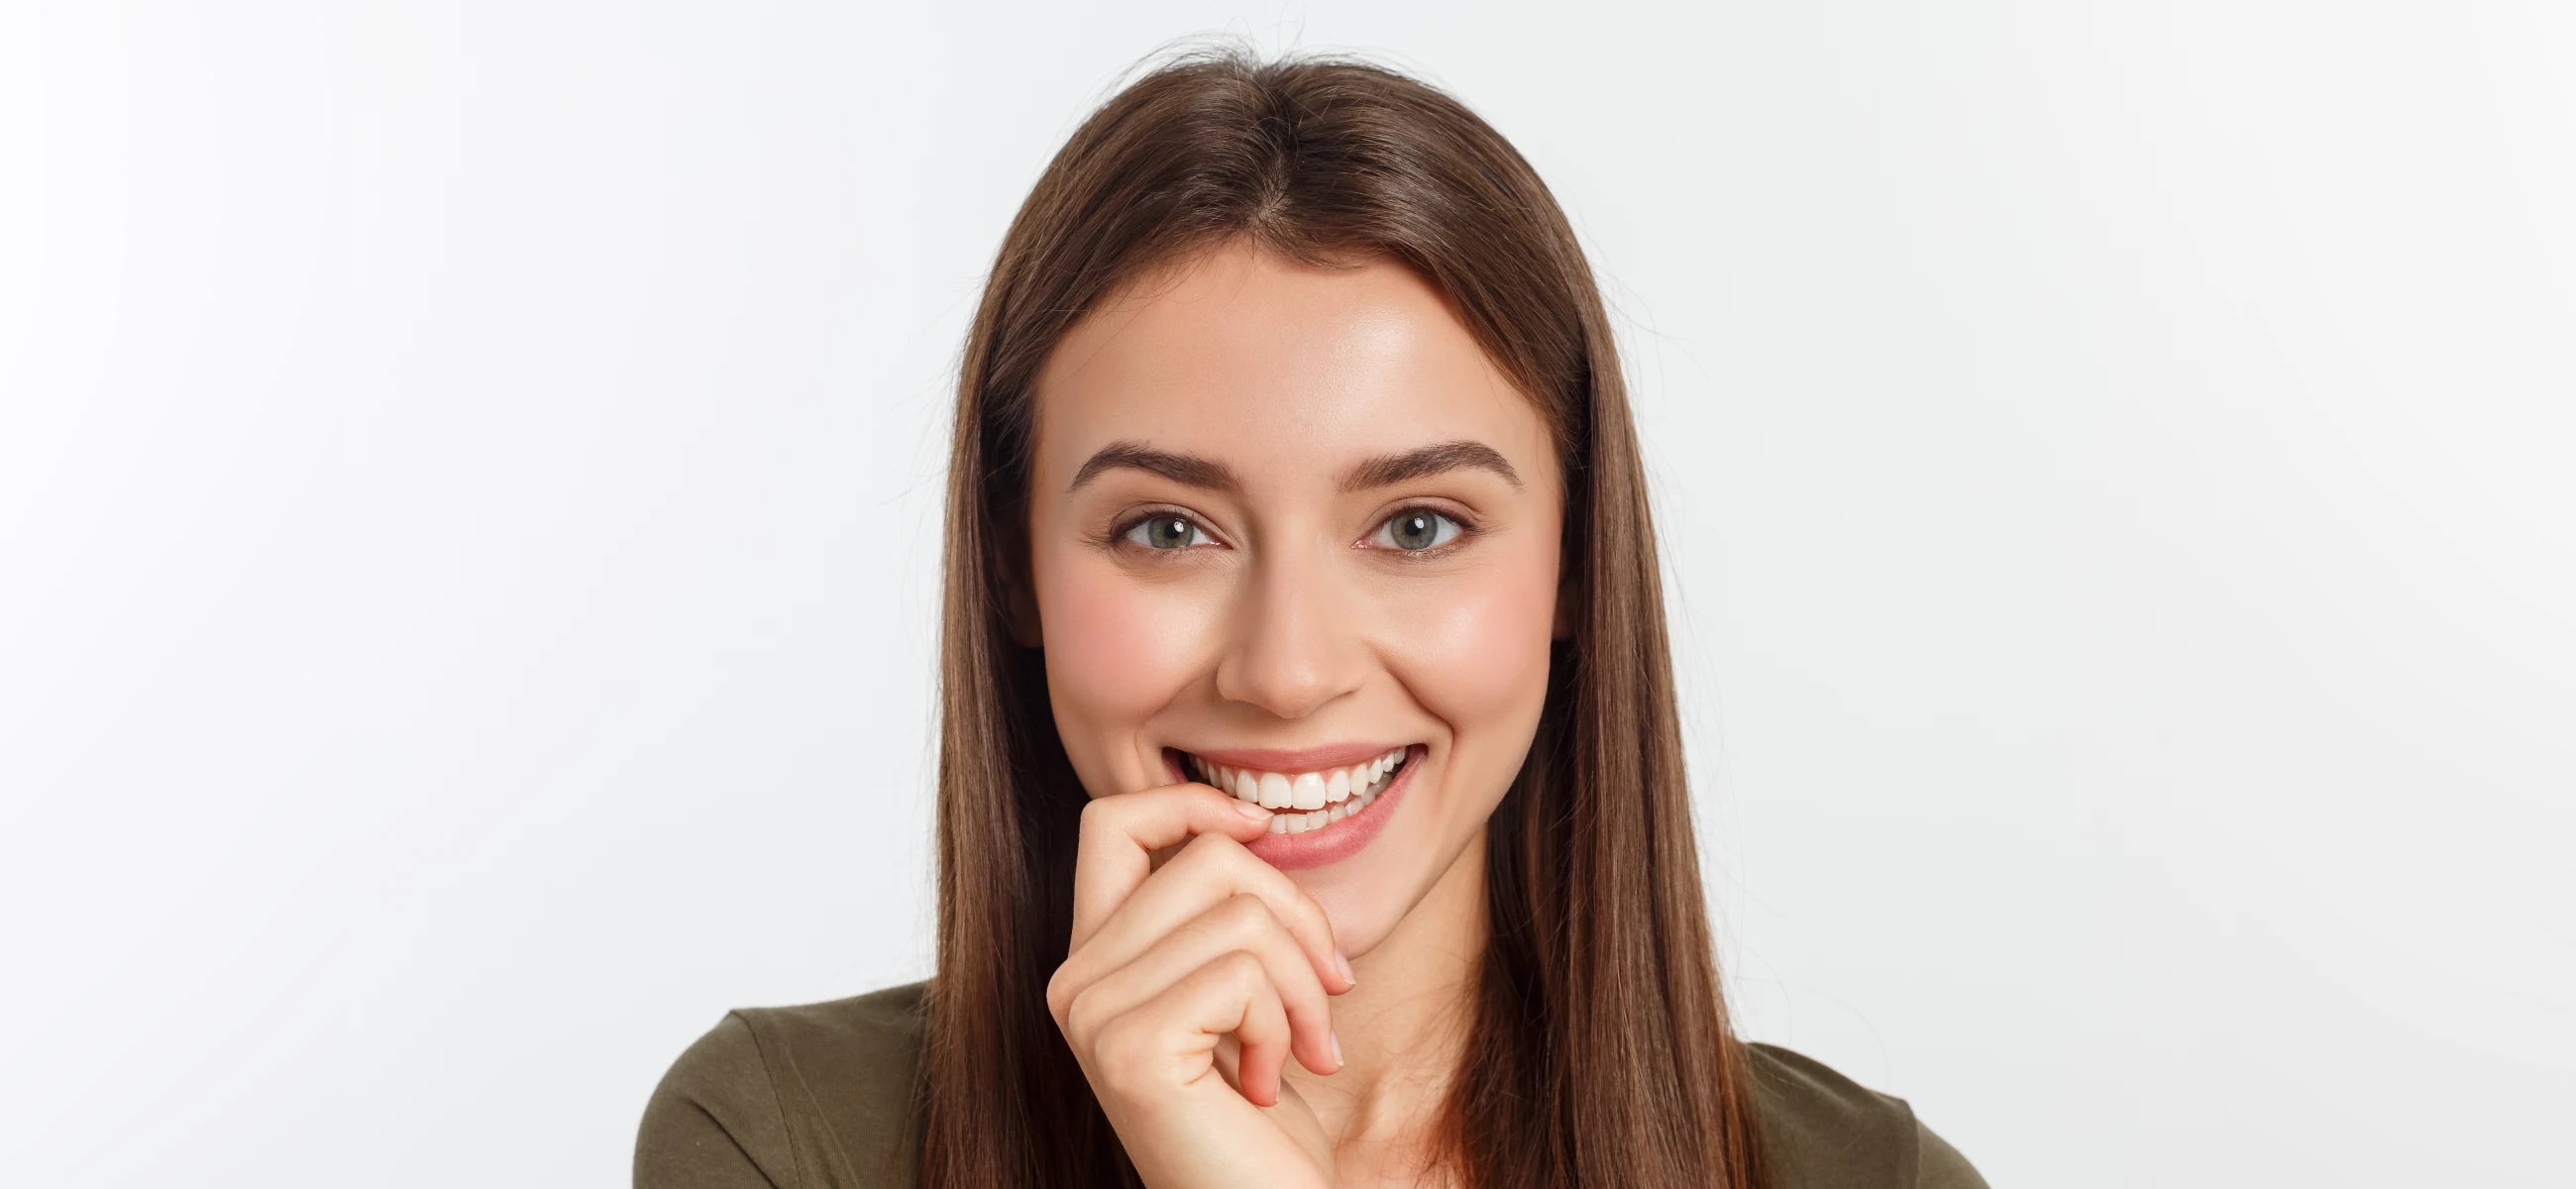 Thin teeth - Causes, symptoms, and effective solutions